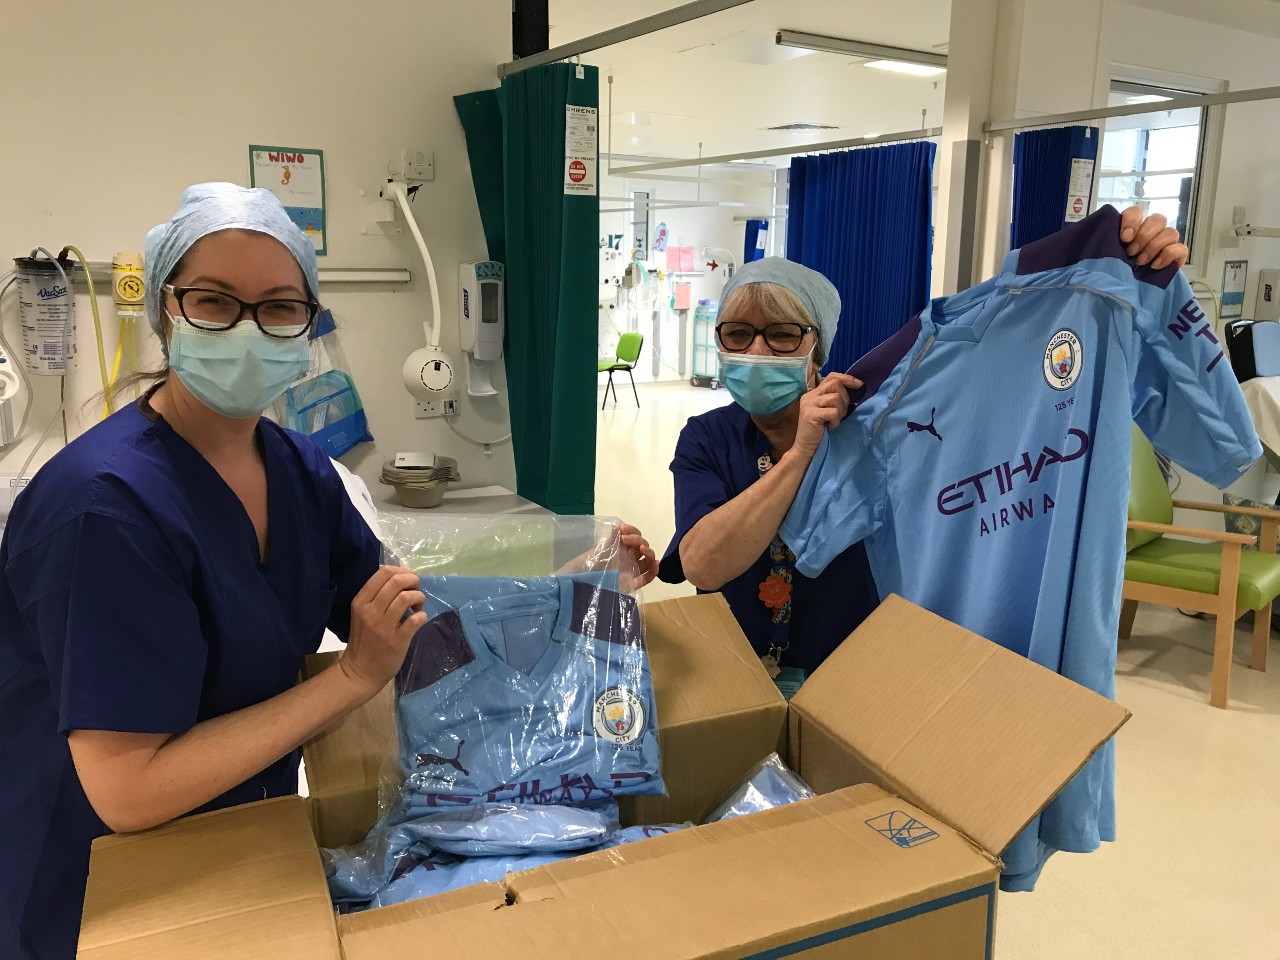 Manchester City kits were turned into hospital gowns by Manchester Fashion Institute staff and students